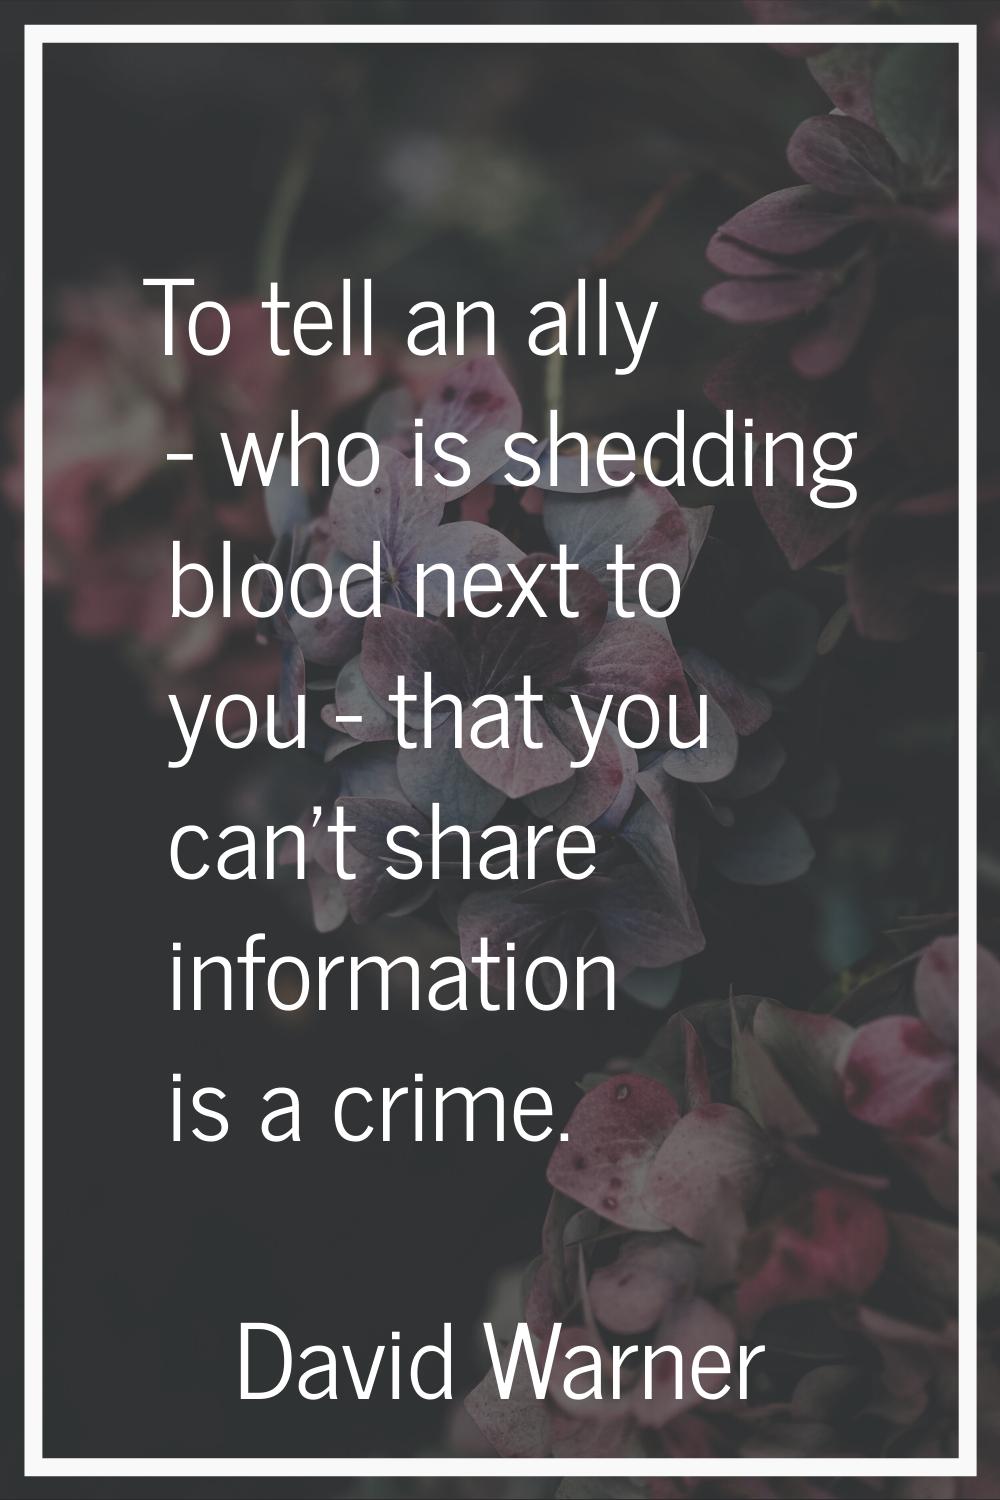 To tell an ally - who is shedding blood next to you - that you can't share information is a crime.